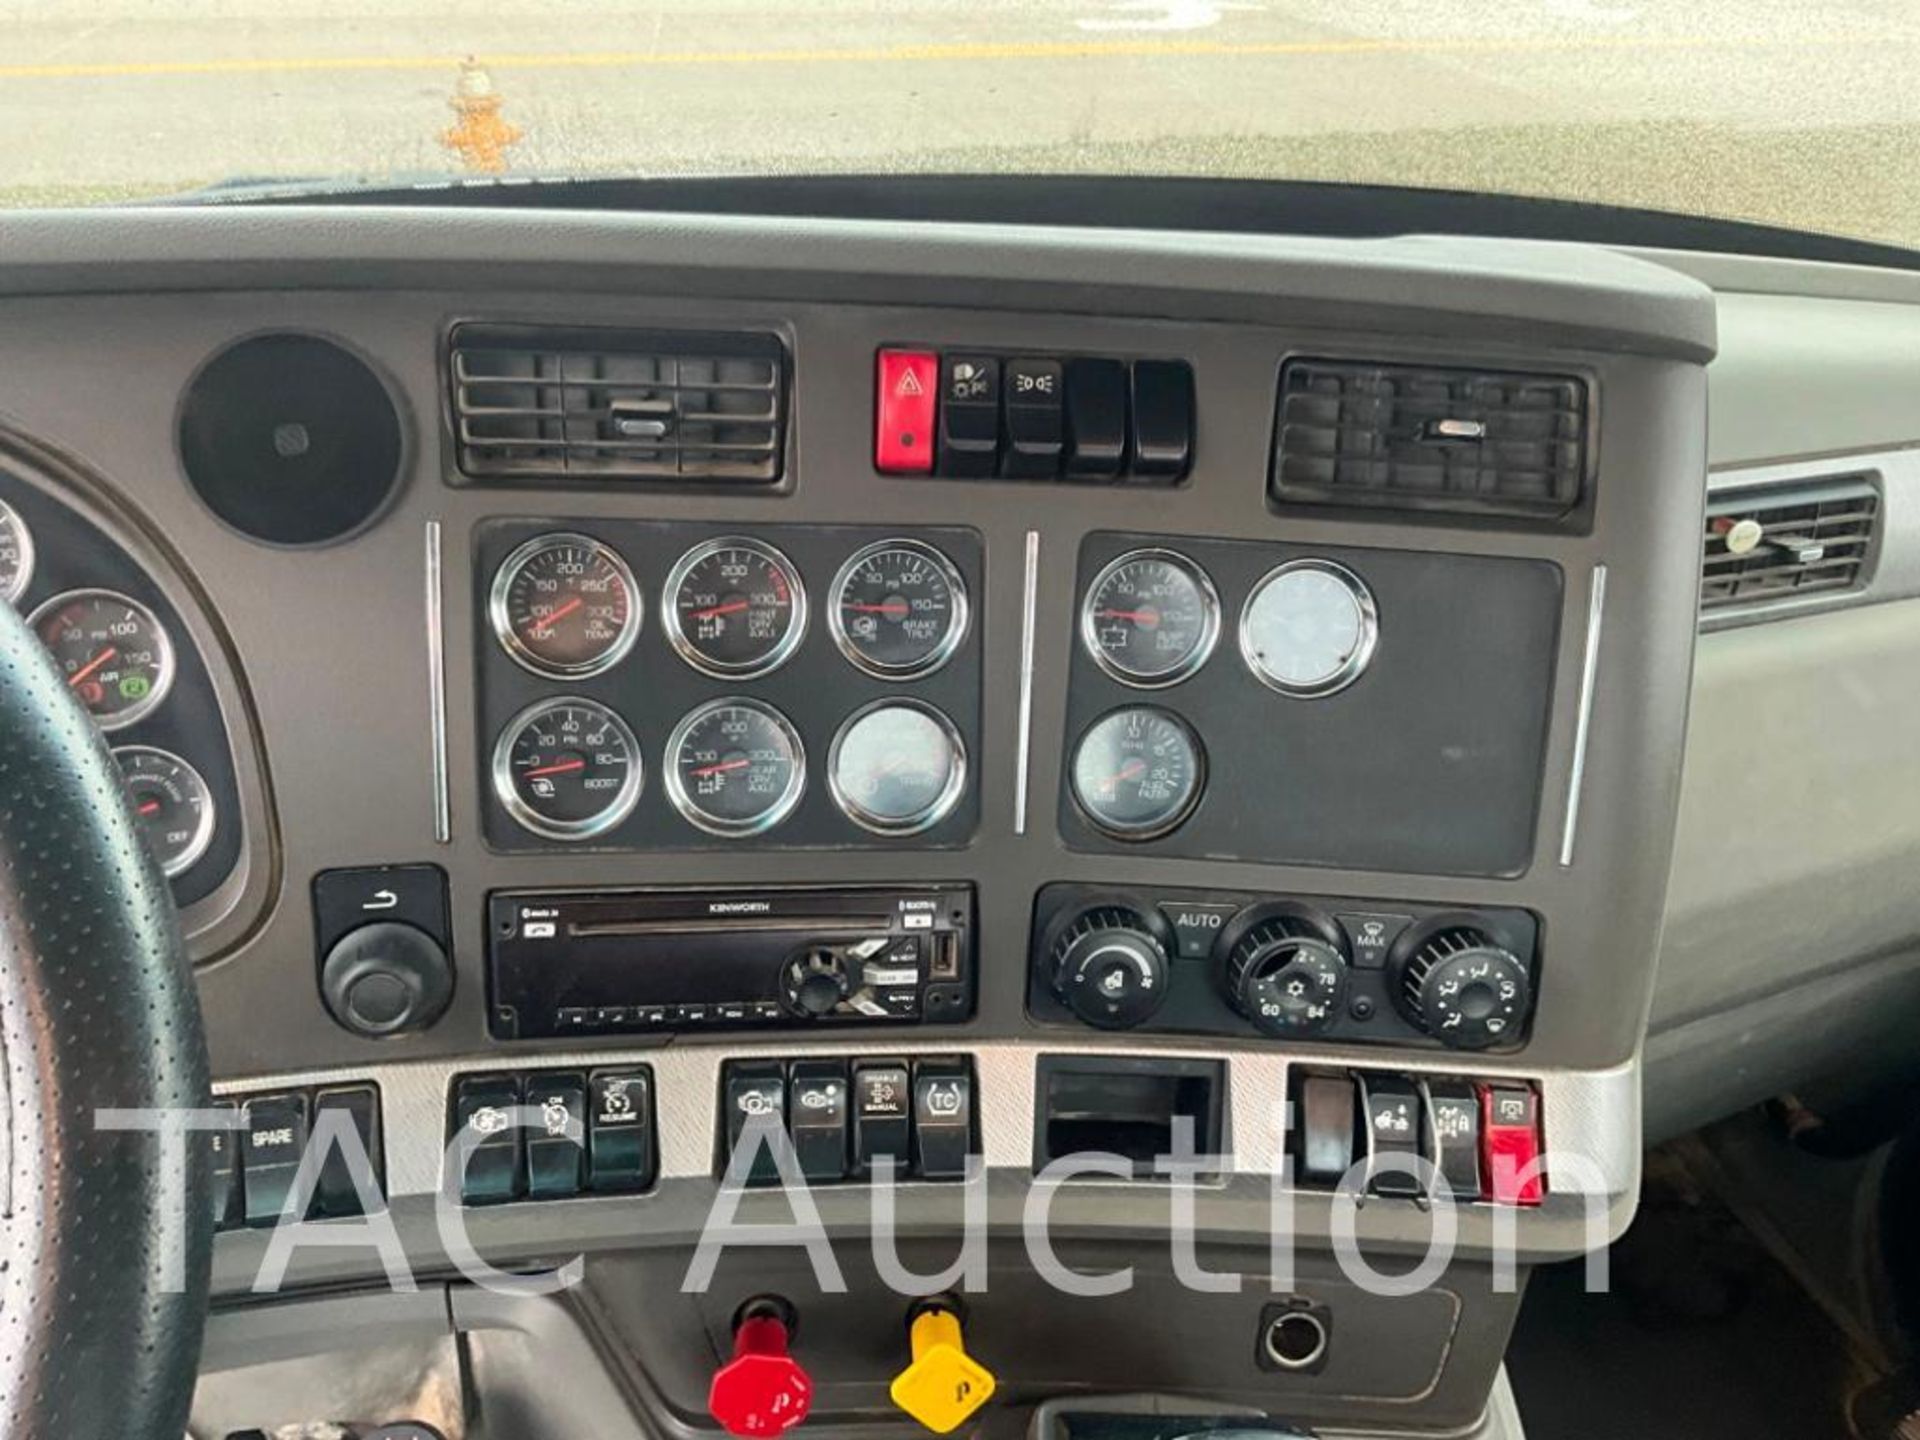 2018 Kenworth T880 Day Cab - Image 22 of 70